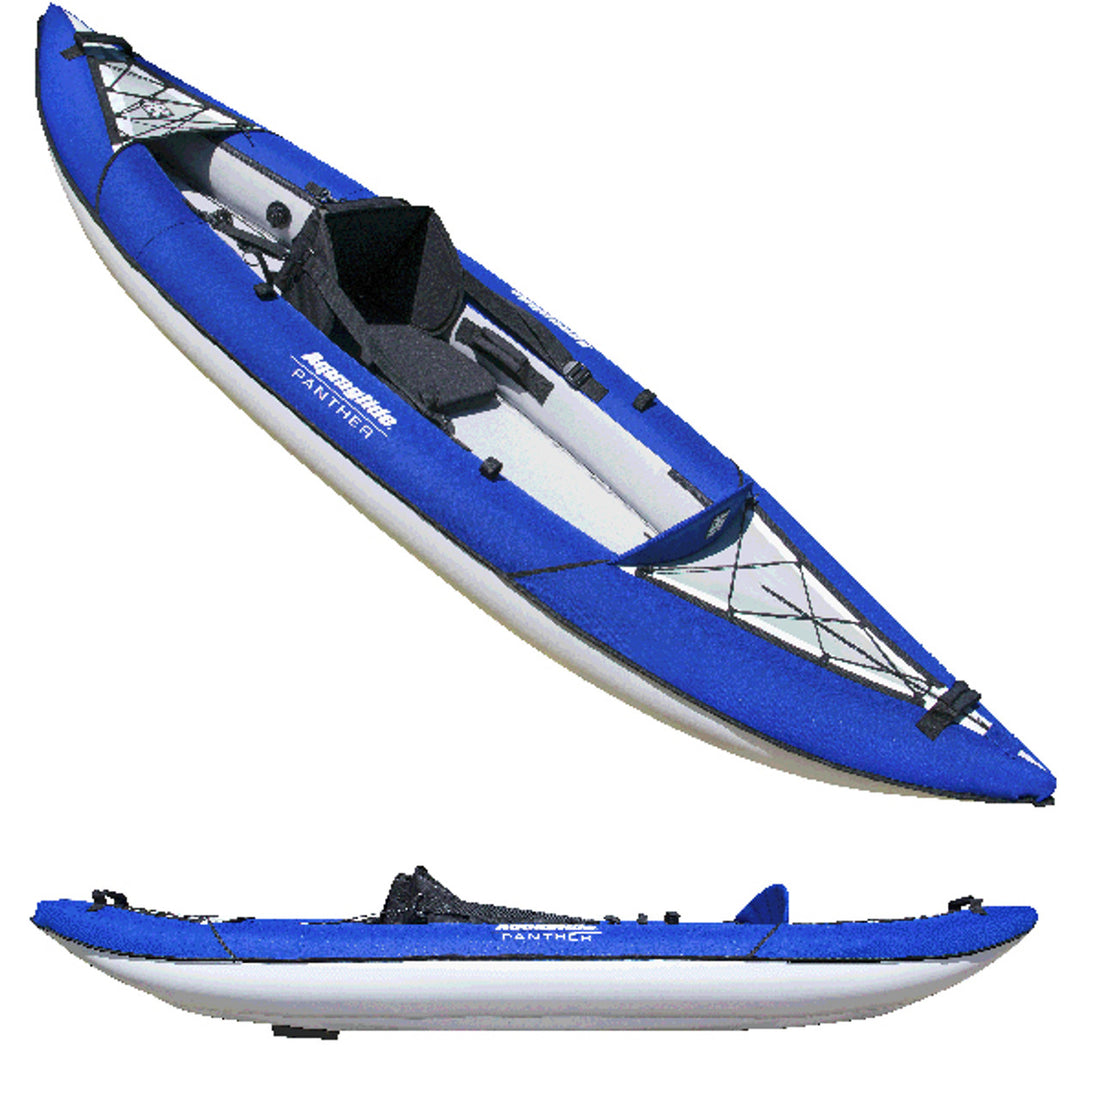 Product Review: AquaGlide Panther One Compact Inflatable Kayak